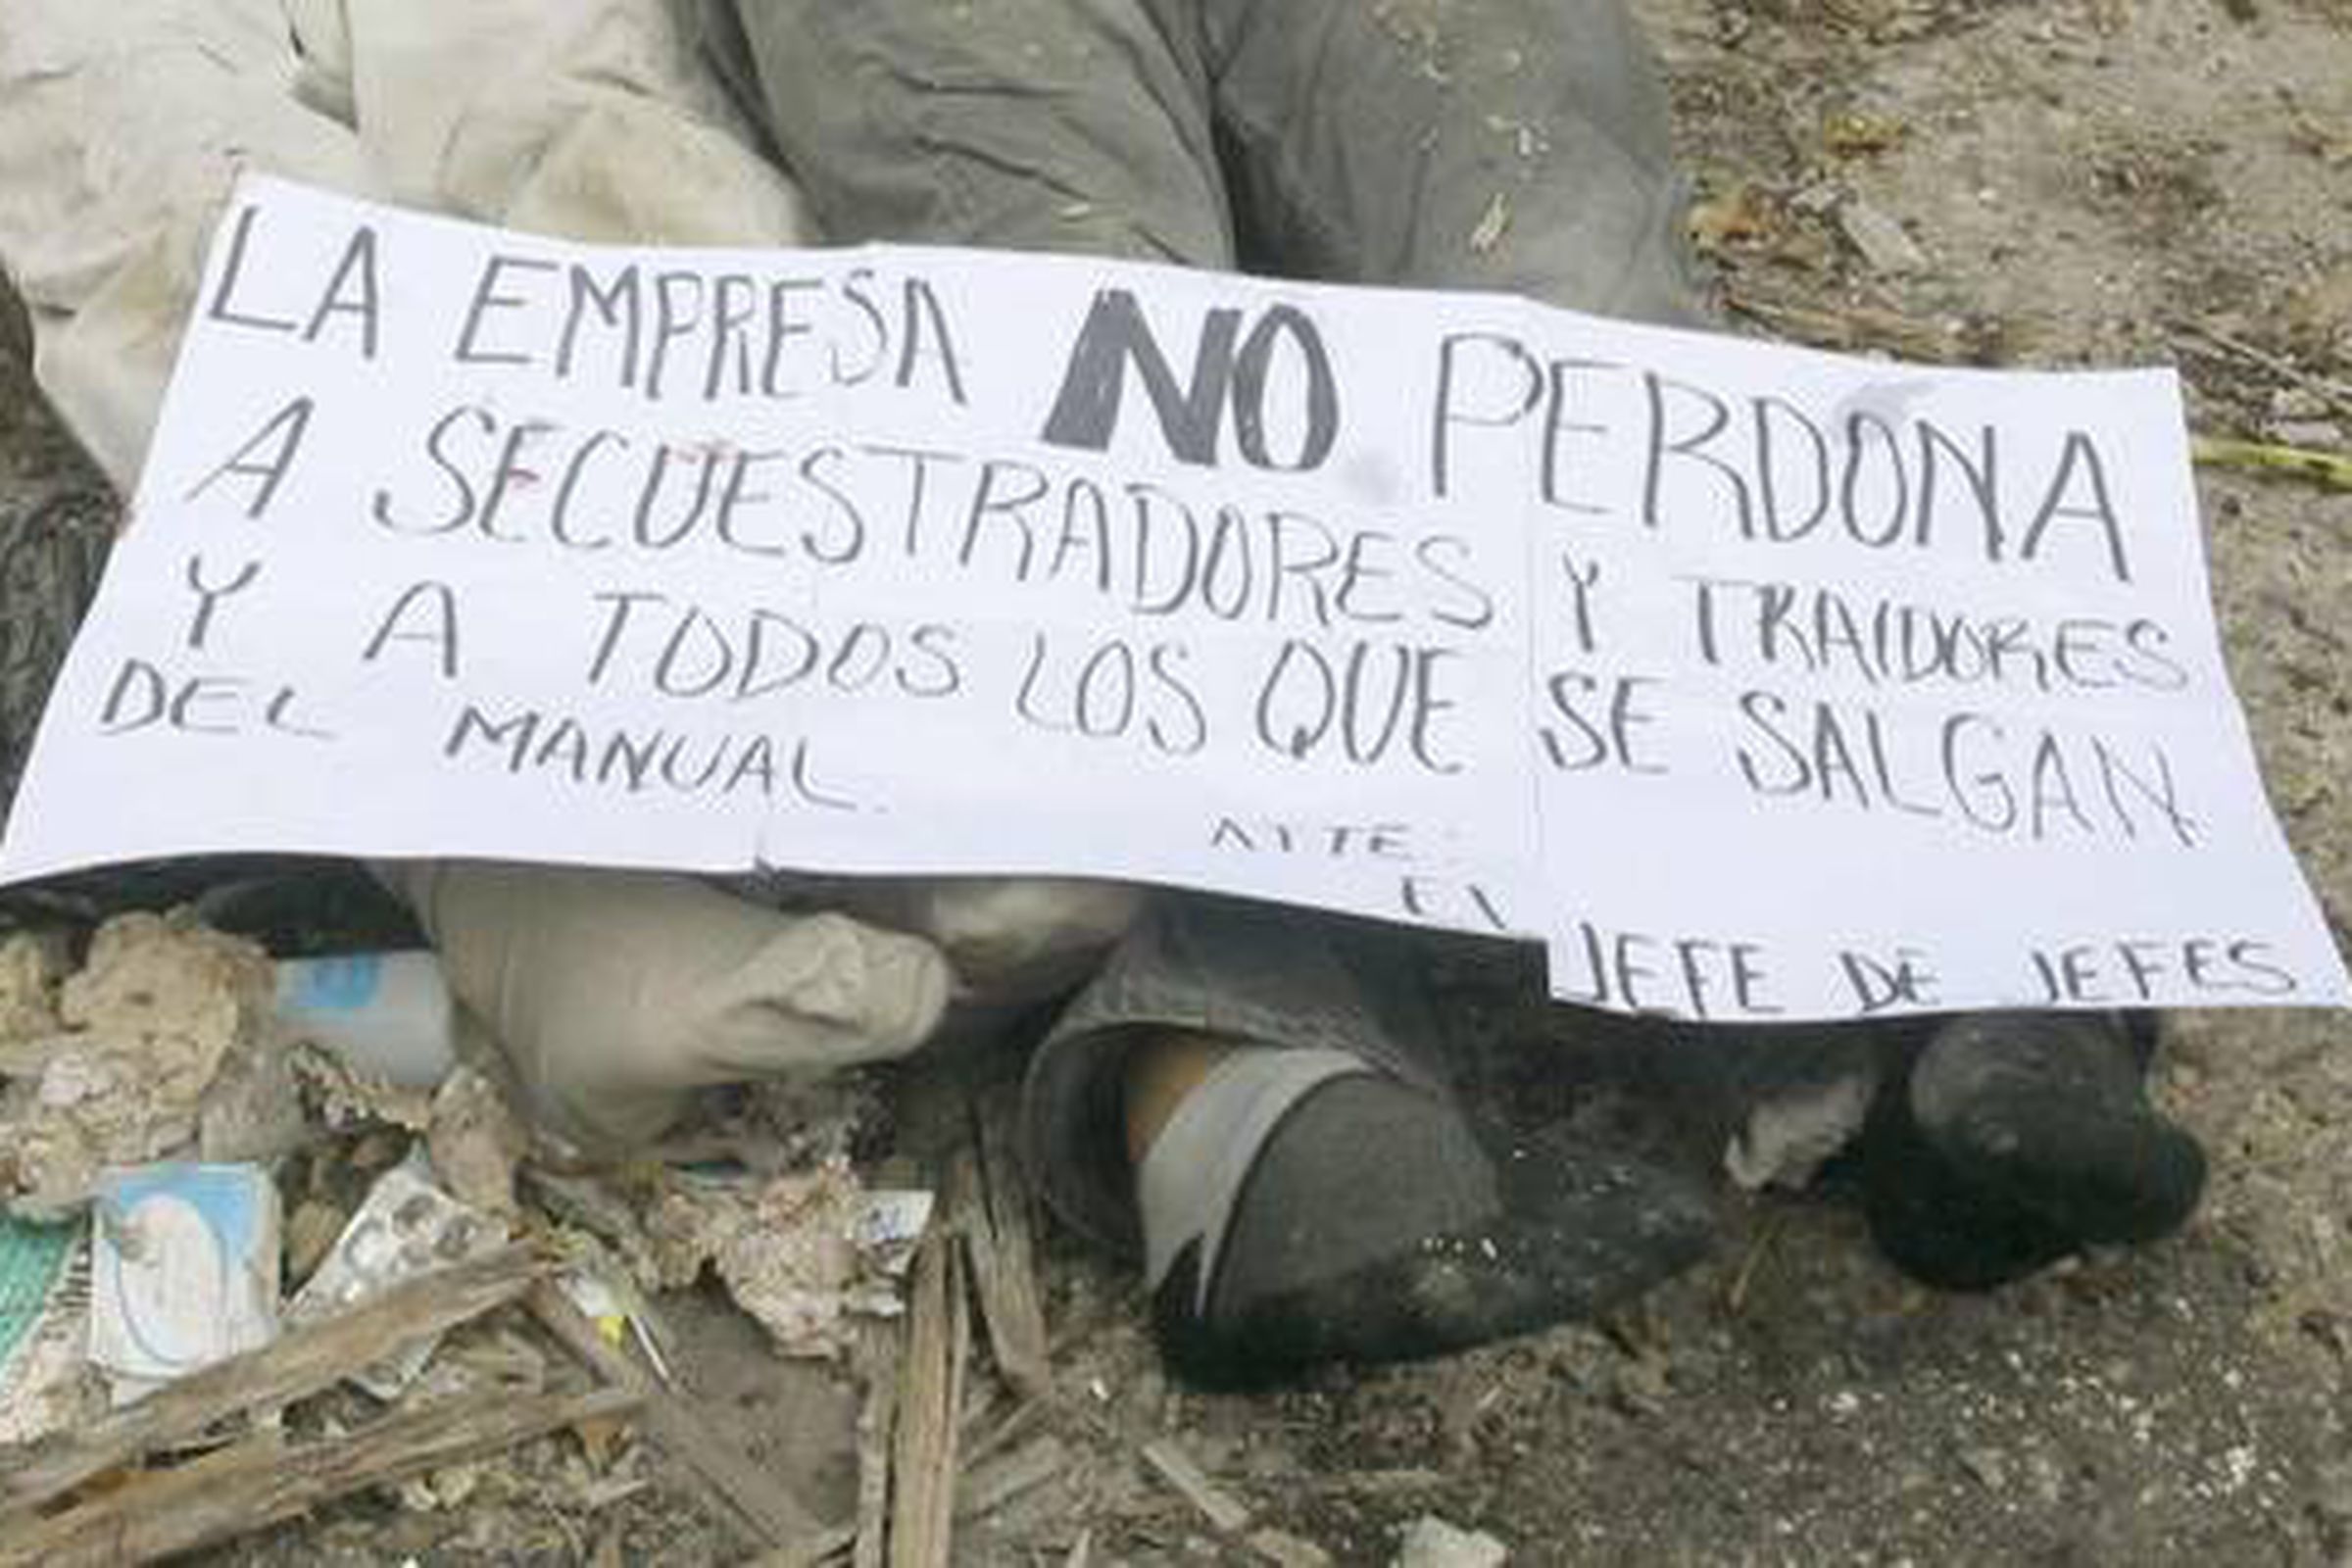 A banner left at the seeking of a cartel killing. Translated to English, it reads, in part, "This is what happens to thieves, kidnappers and traitors."